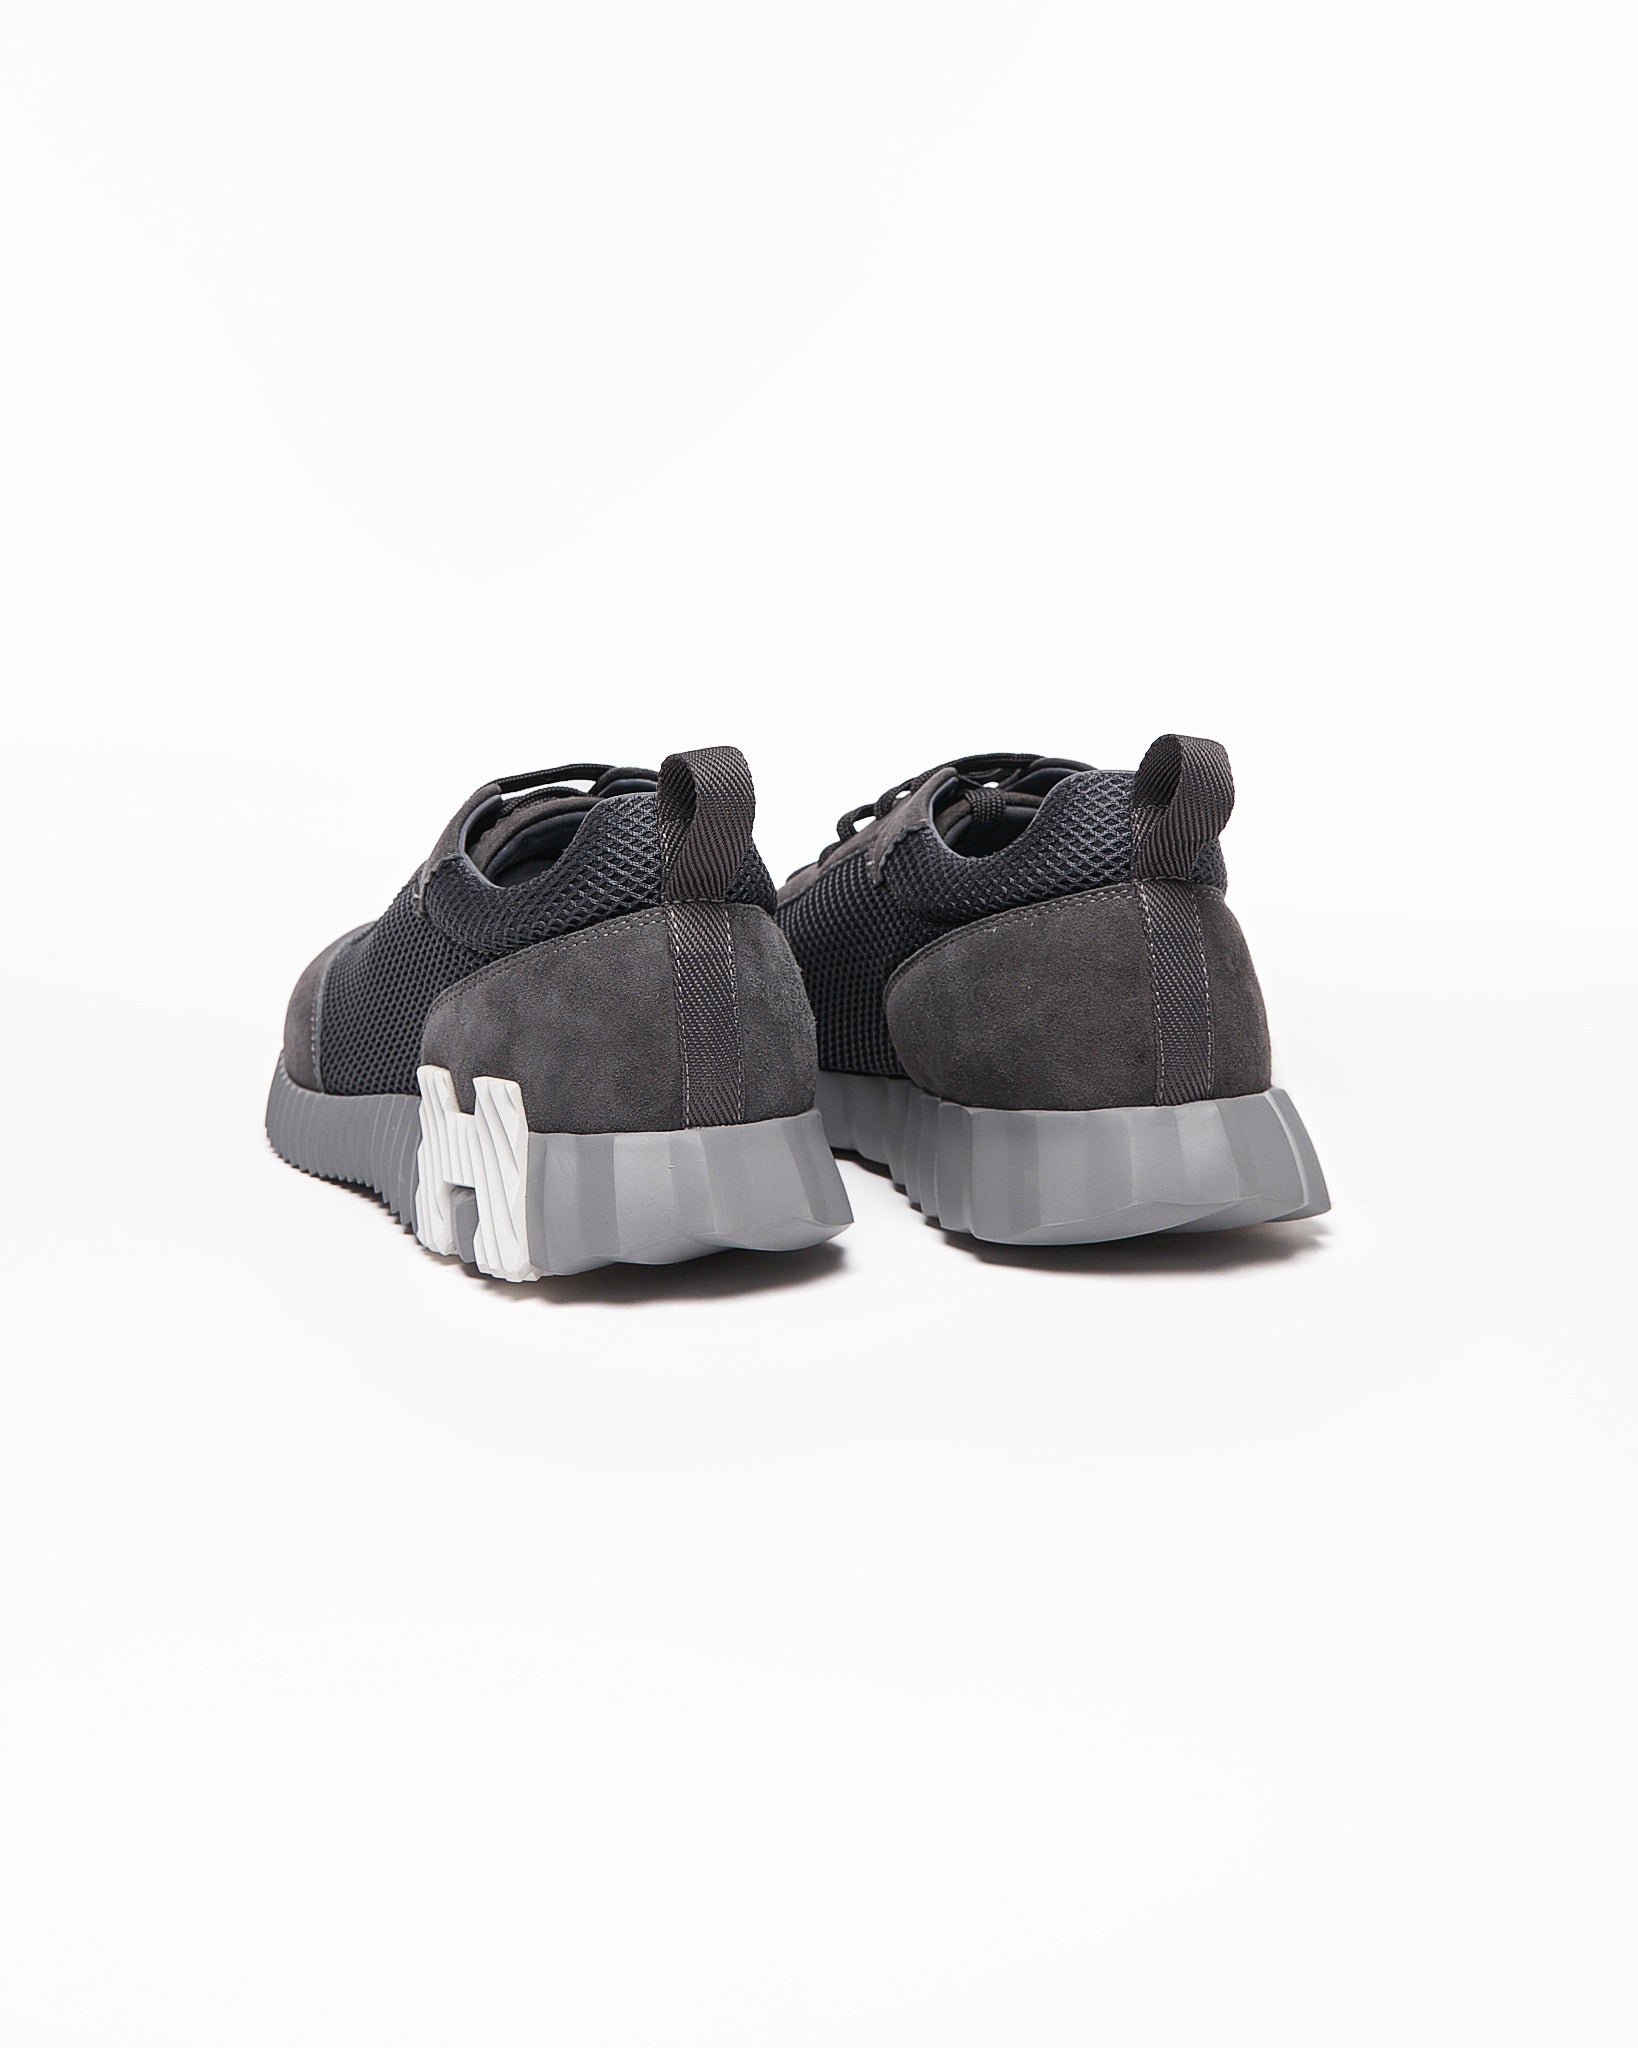 HER Bouncing Black Sneakers Shoes 130.90